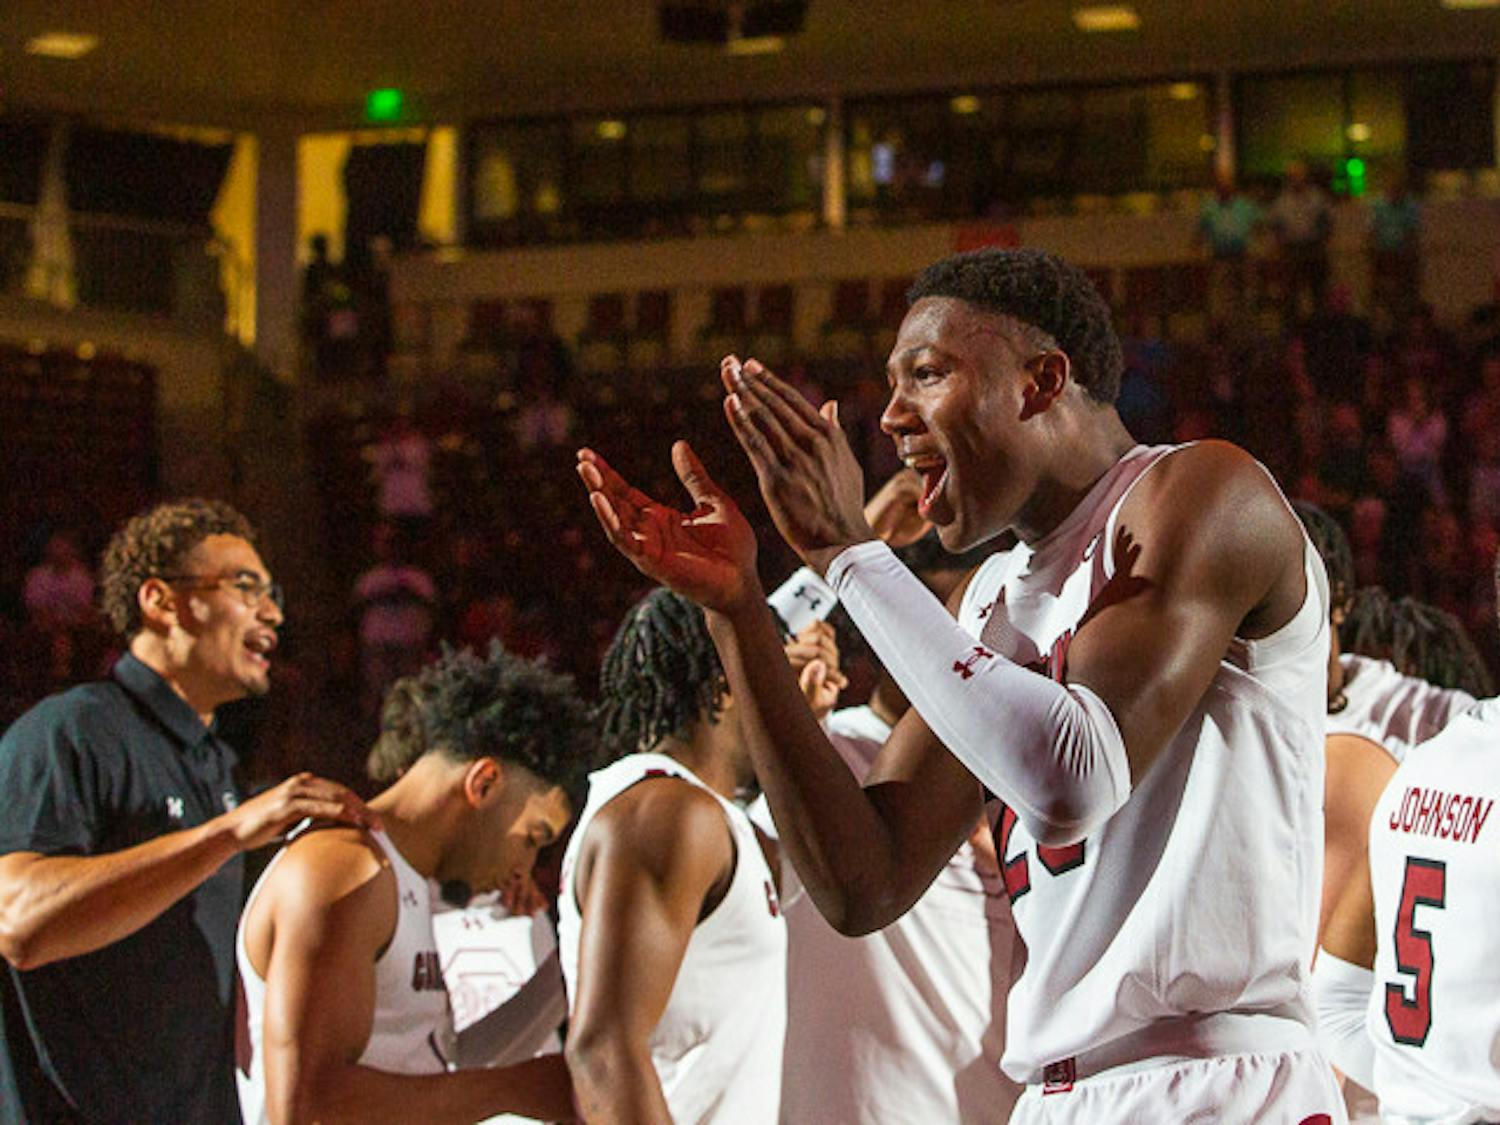 Freshman forward Gregory “GG” Jackson II radiates energy to his teammates during the Gamecocks introduction. The team kicked off their 2022-2023 season with an 80-77 win over the S.C. State Bulldogs with an 80-77 win on Nov. 8, 2022.